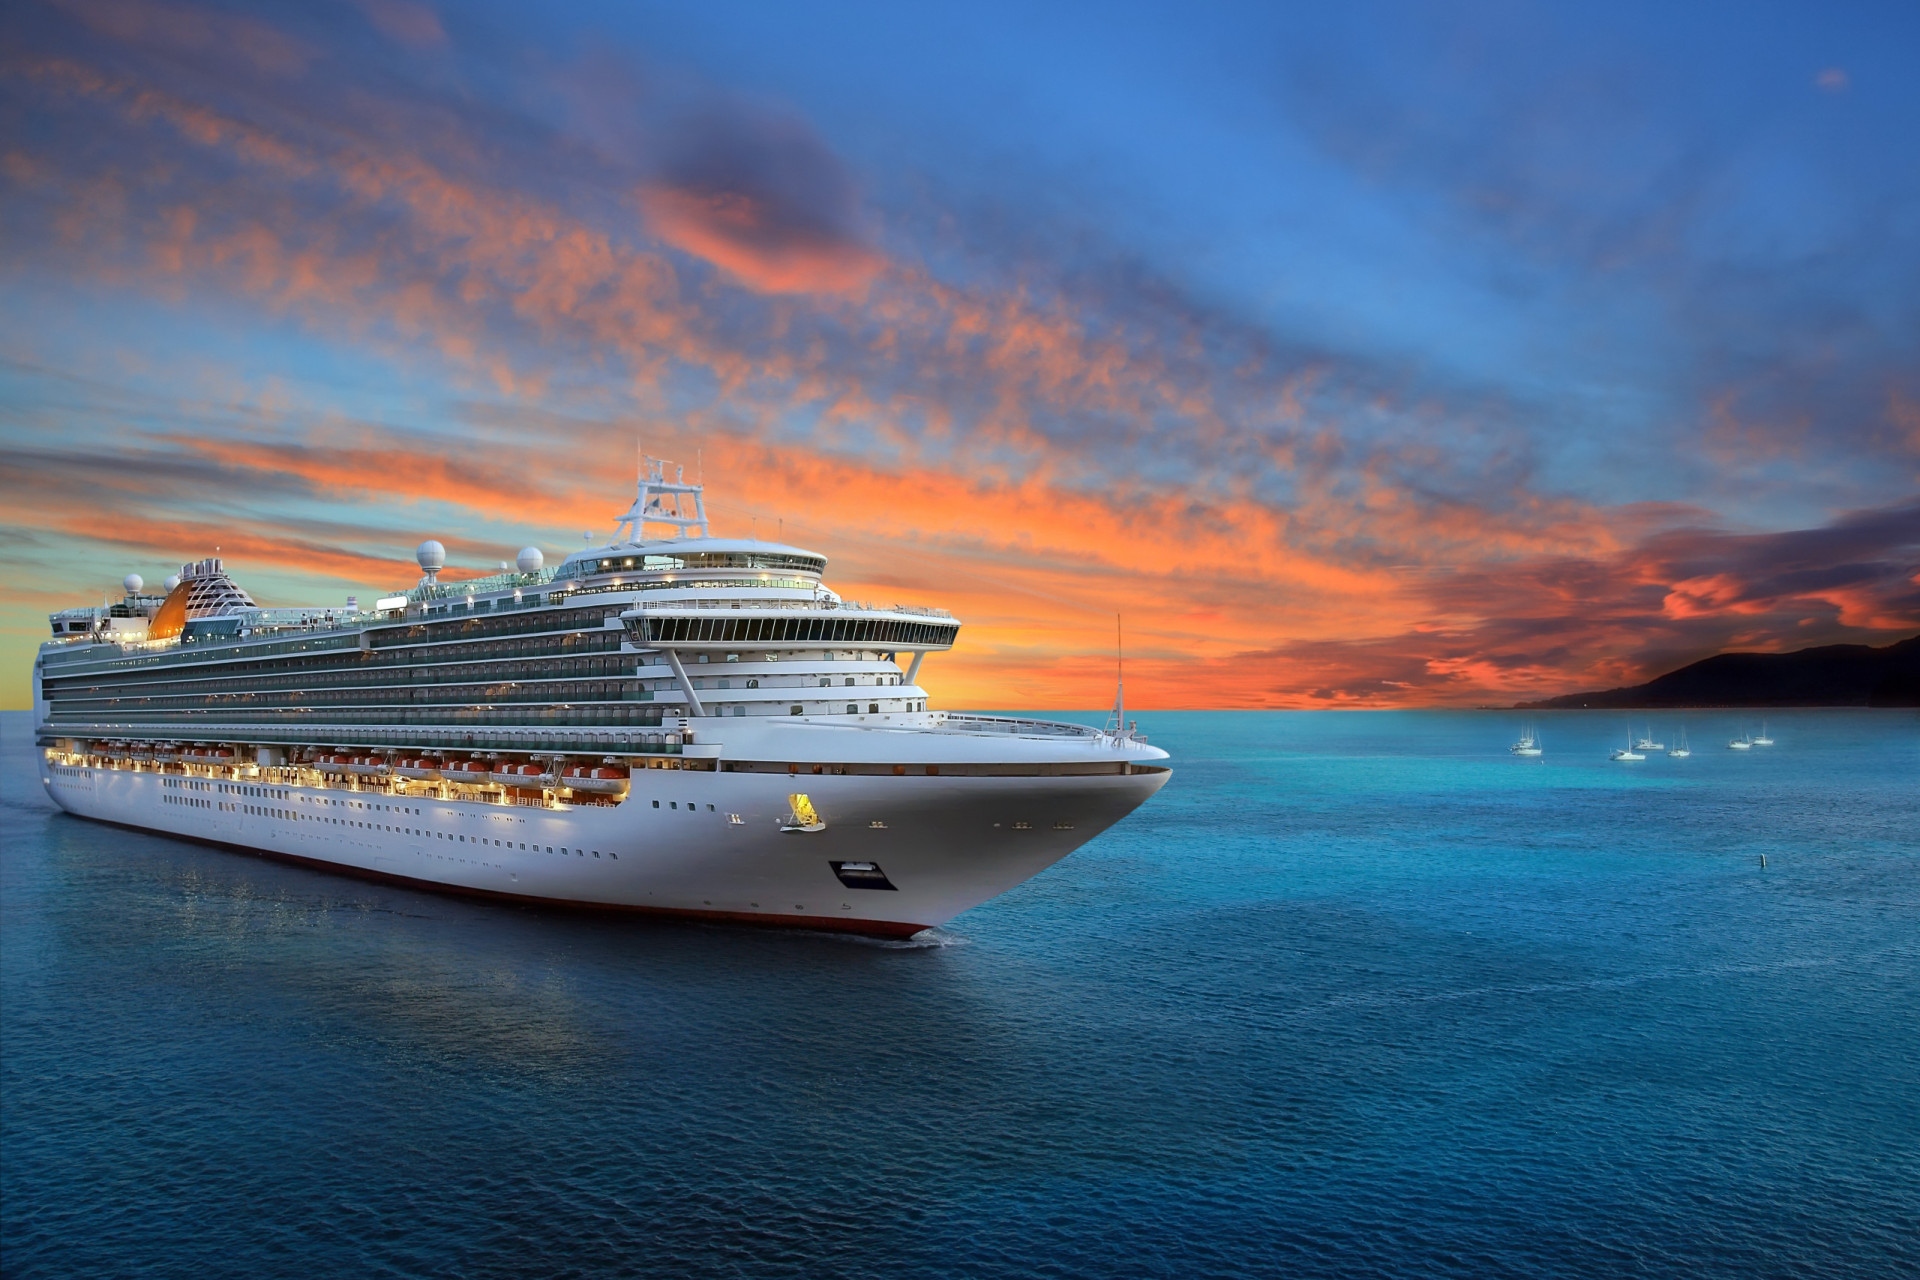 <p>A cruise is one of the most popular vacation options in the world. Passengers board what is effectively a huge floating hotel featuring a wealth of fabulous leisure facilities and amenities, and sail to some of the most desirable global destinations. But how did this industry evolve?</p> <p>Click through and embark on a voyage through the history of the cruise ship holiday.</p><p>You may also like:<a href="https://www.starsinsider.com/n/233723?utm_source=msn.com&utm_medium=display&utm_campaign=referral_description&utm_content=502910v1en-ae"> Ridiculous products you won't believe actually exist</a></p>